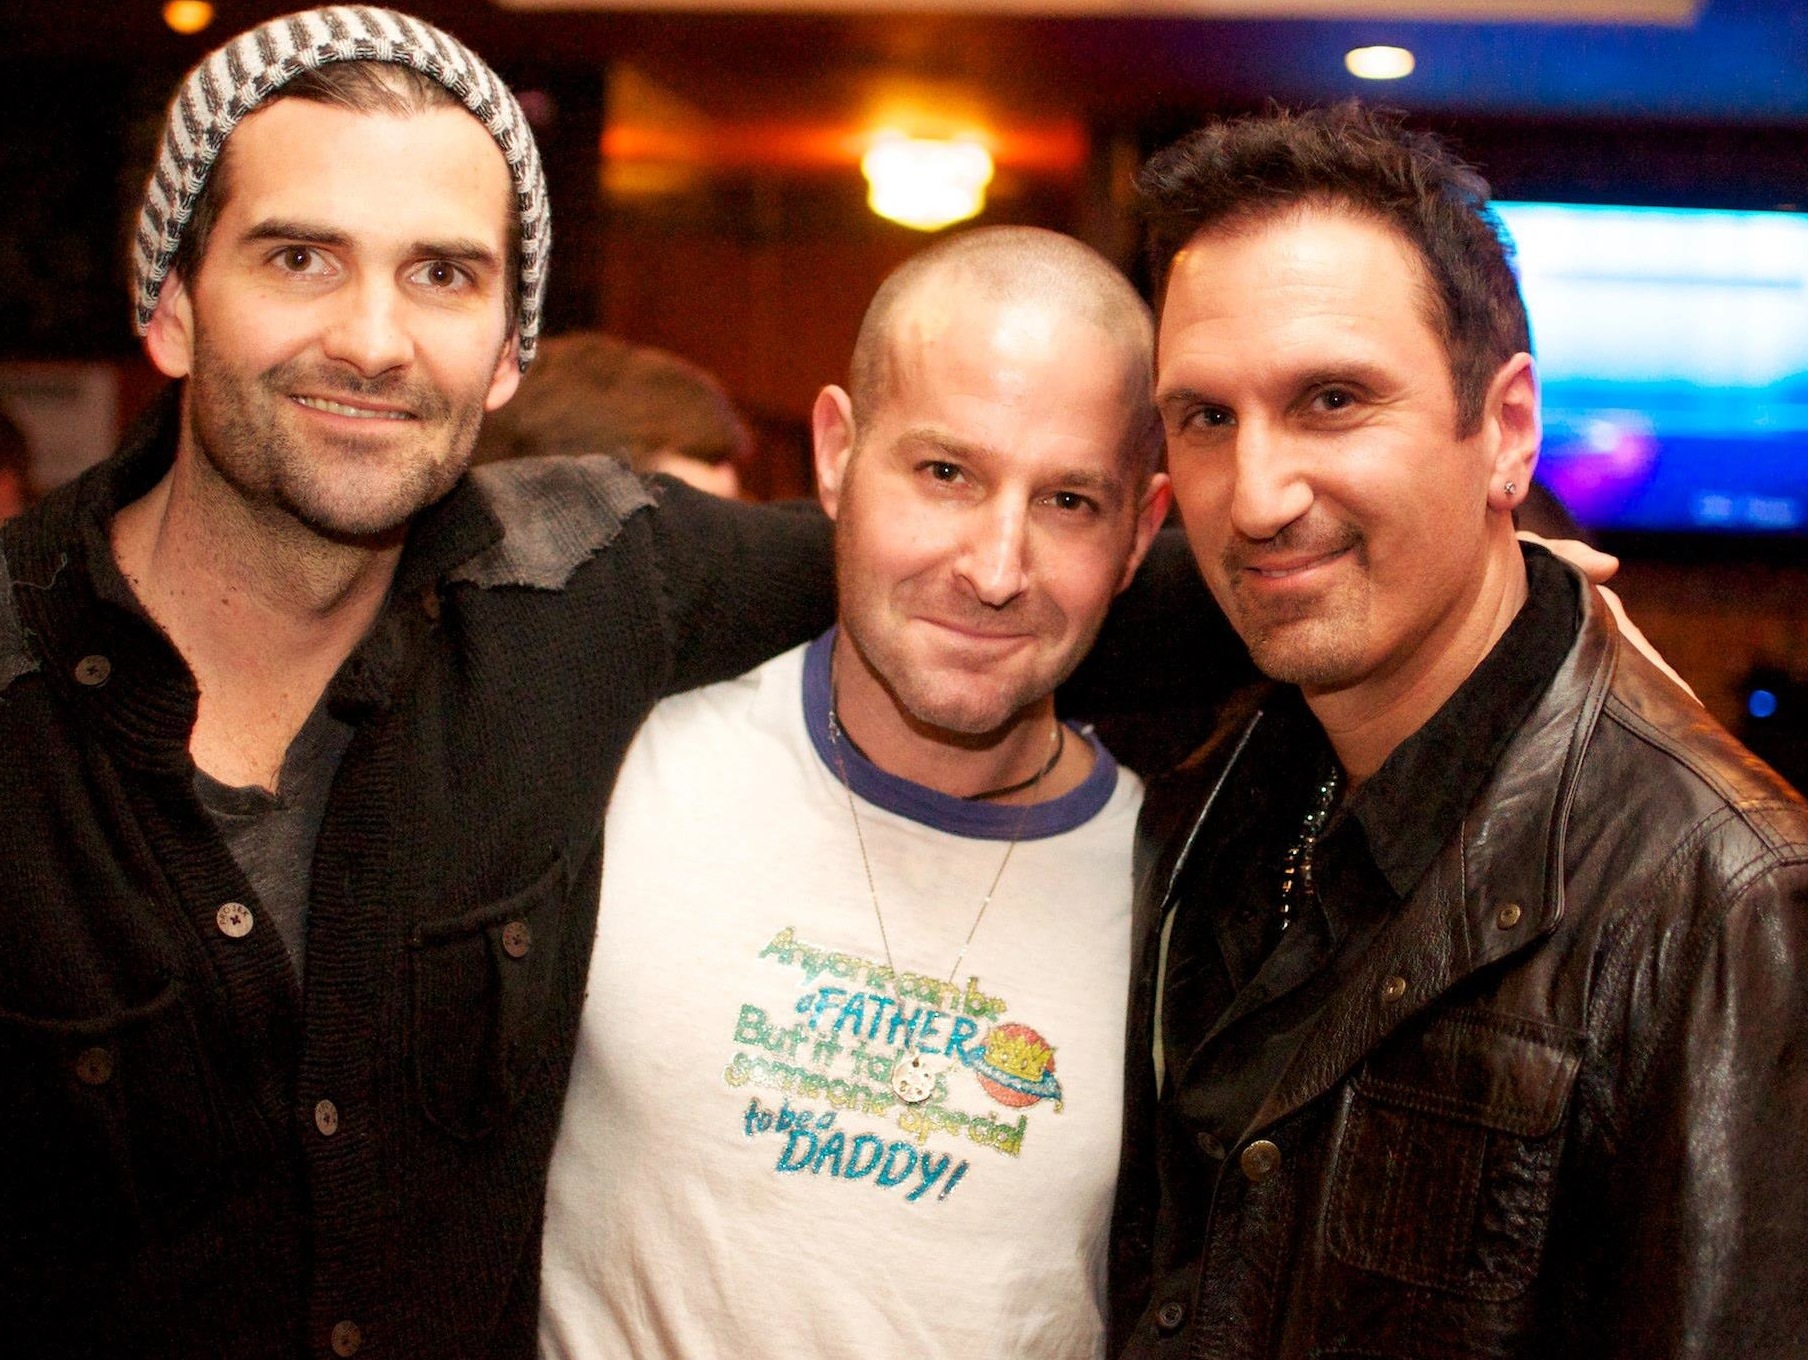 Shawn Parr, Andrew Roth and Roberto Lombardi at the premiere of 